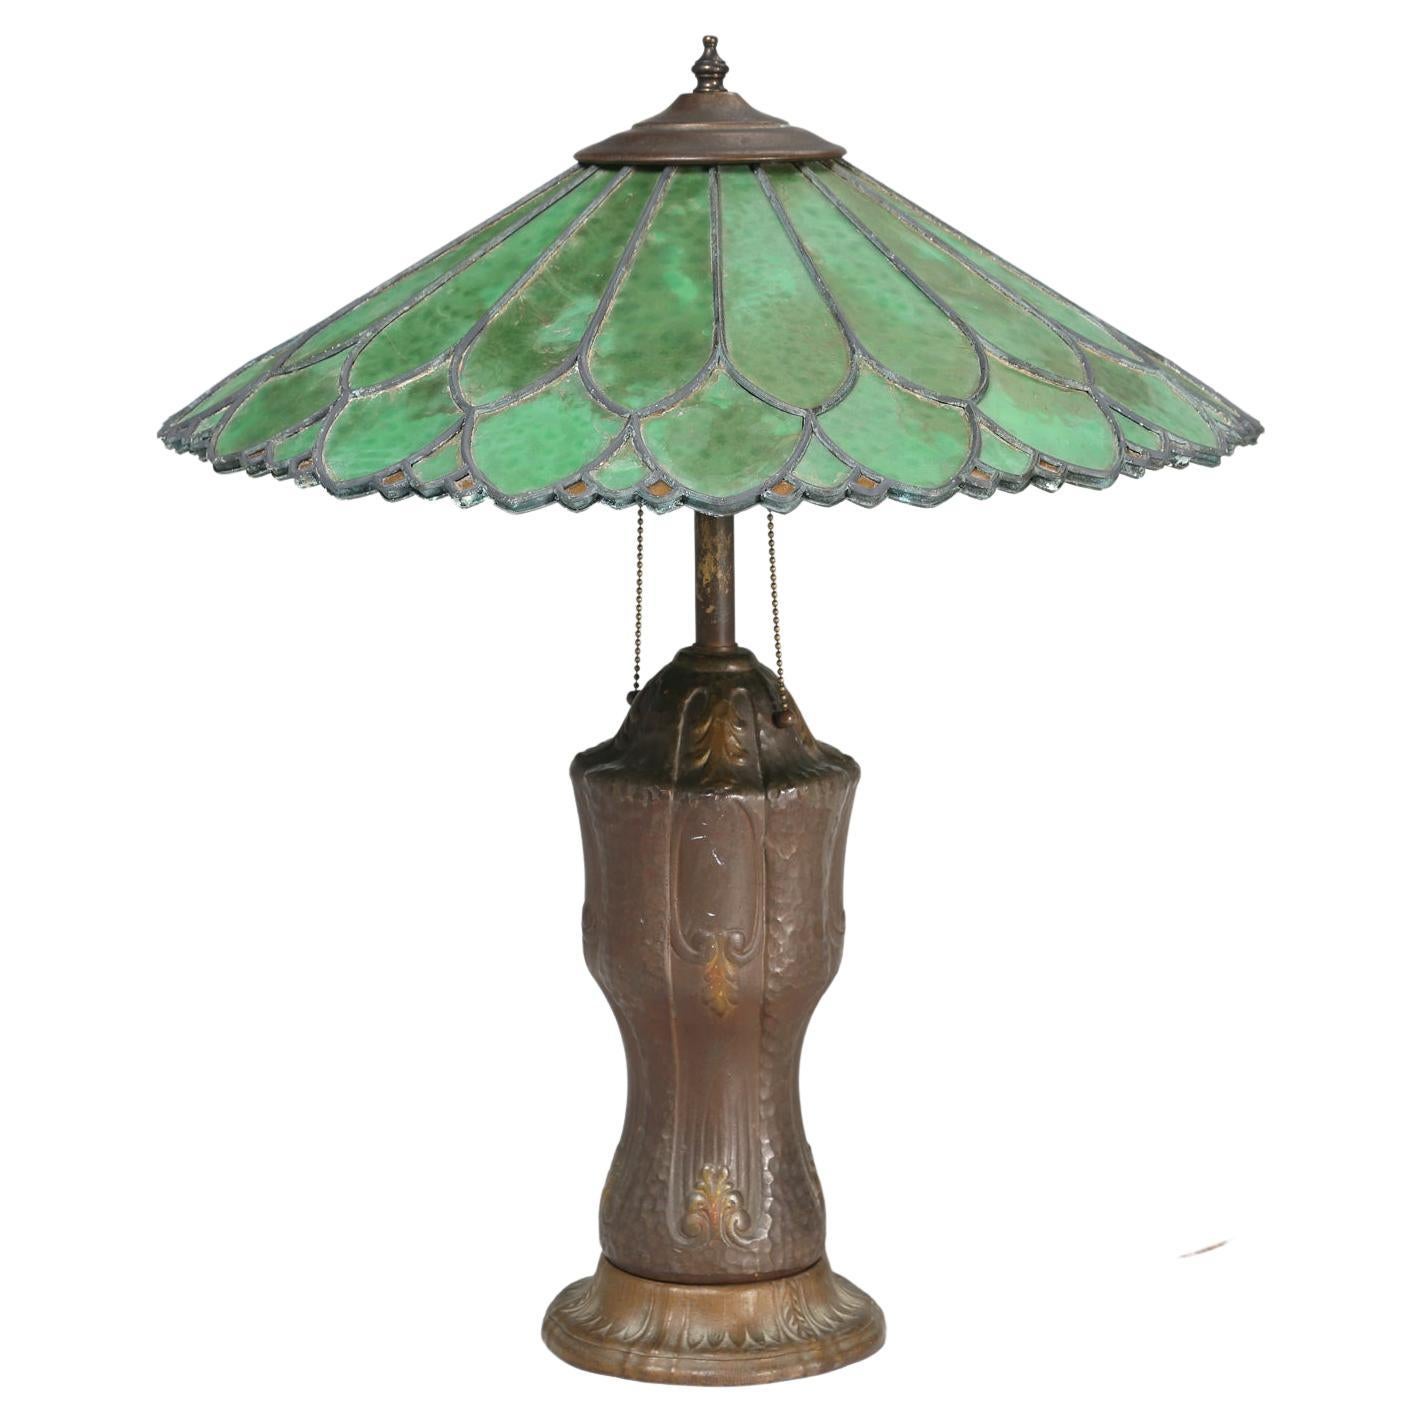 Old Leaded Green Glass Lamp with a Perfect Amount of Patina